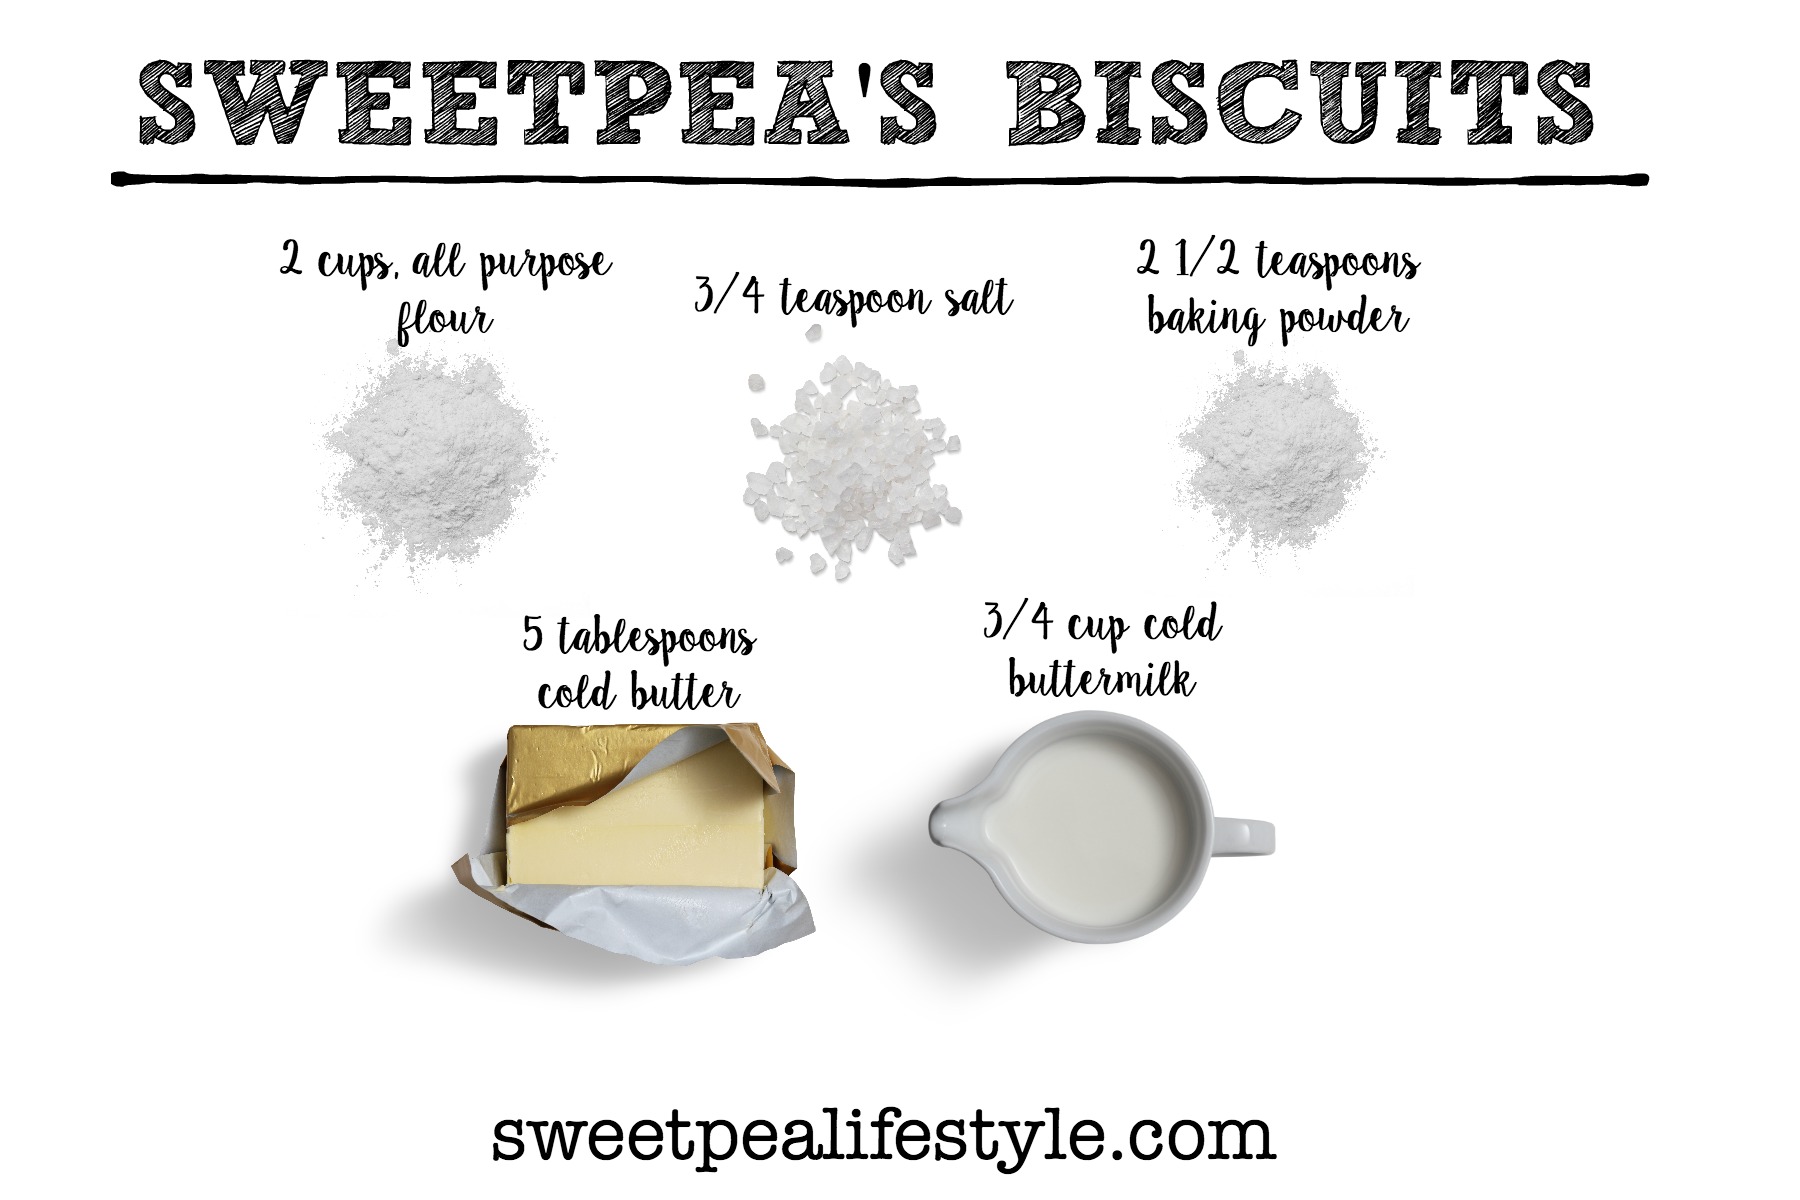 How to Make the BEST Biscuits.